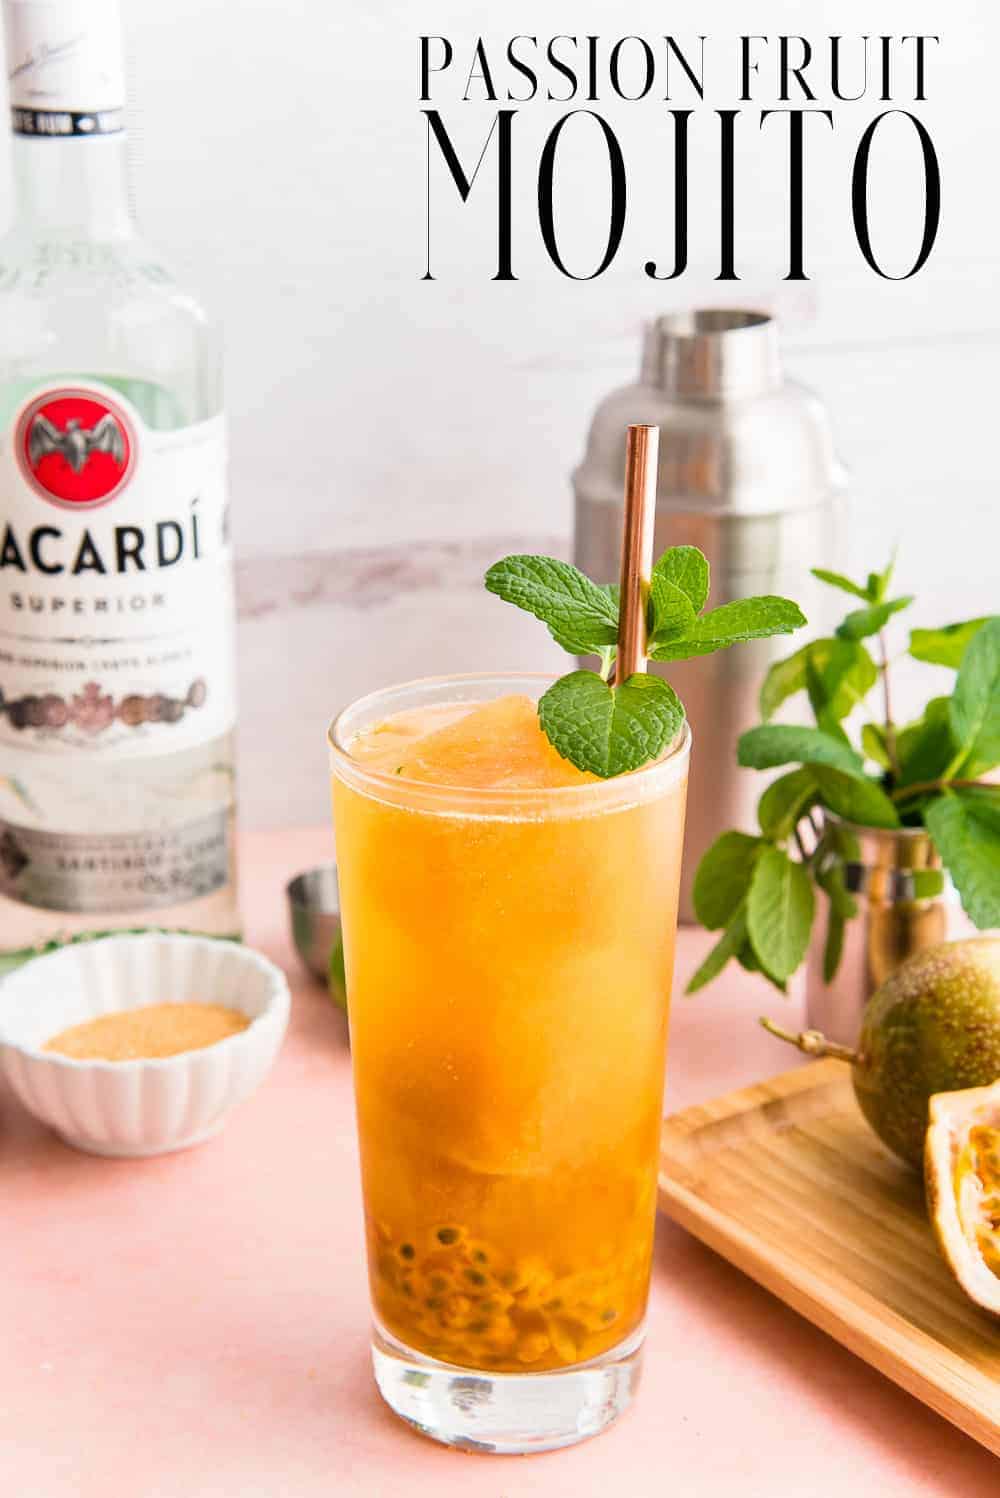 Passion Fruits Mojitos are the best way to quench a thirst during the warm Spring and Summer months. Made with double the amount of passion fruit, they'll become your new favorite cocktail. #passionfruitmojito #passionfruit #mojito #rumcocktail #rumdrinks #cocktailrecipe #PuertoRicanrecipes #PuertoRicanrum #bacardirum #21andover via @ediblesense